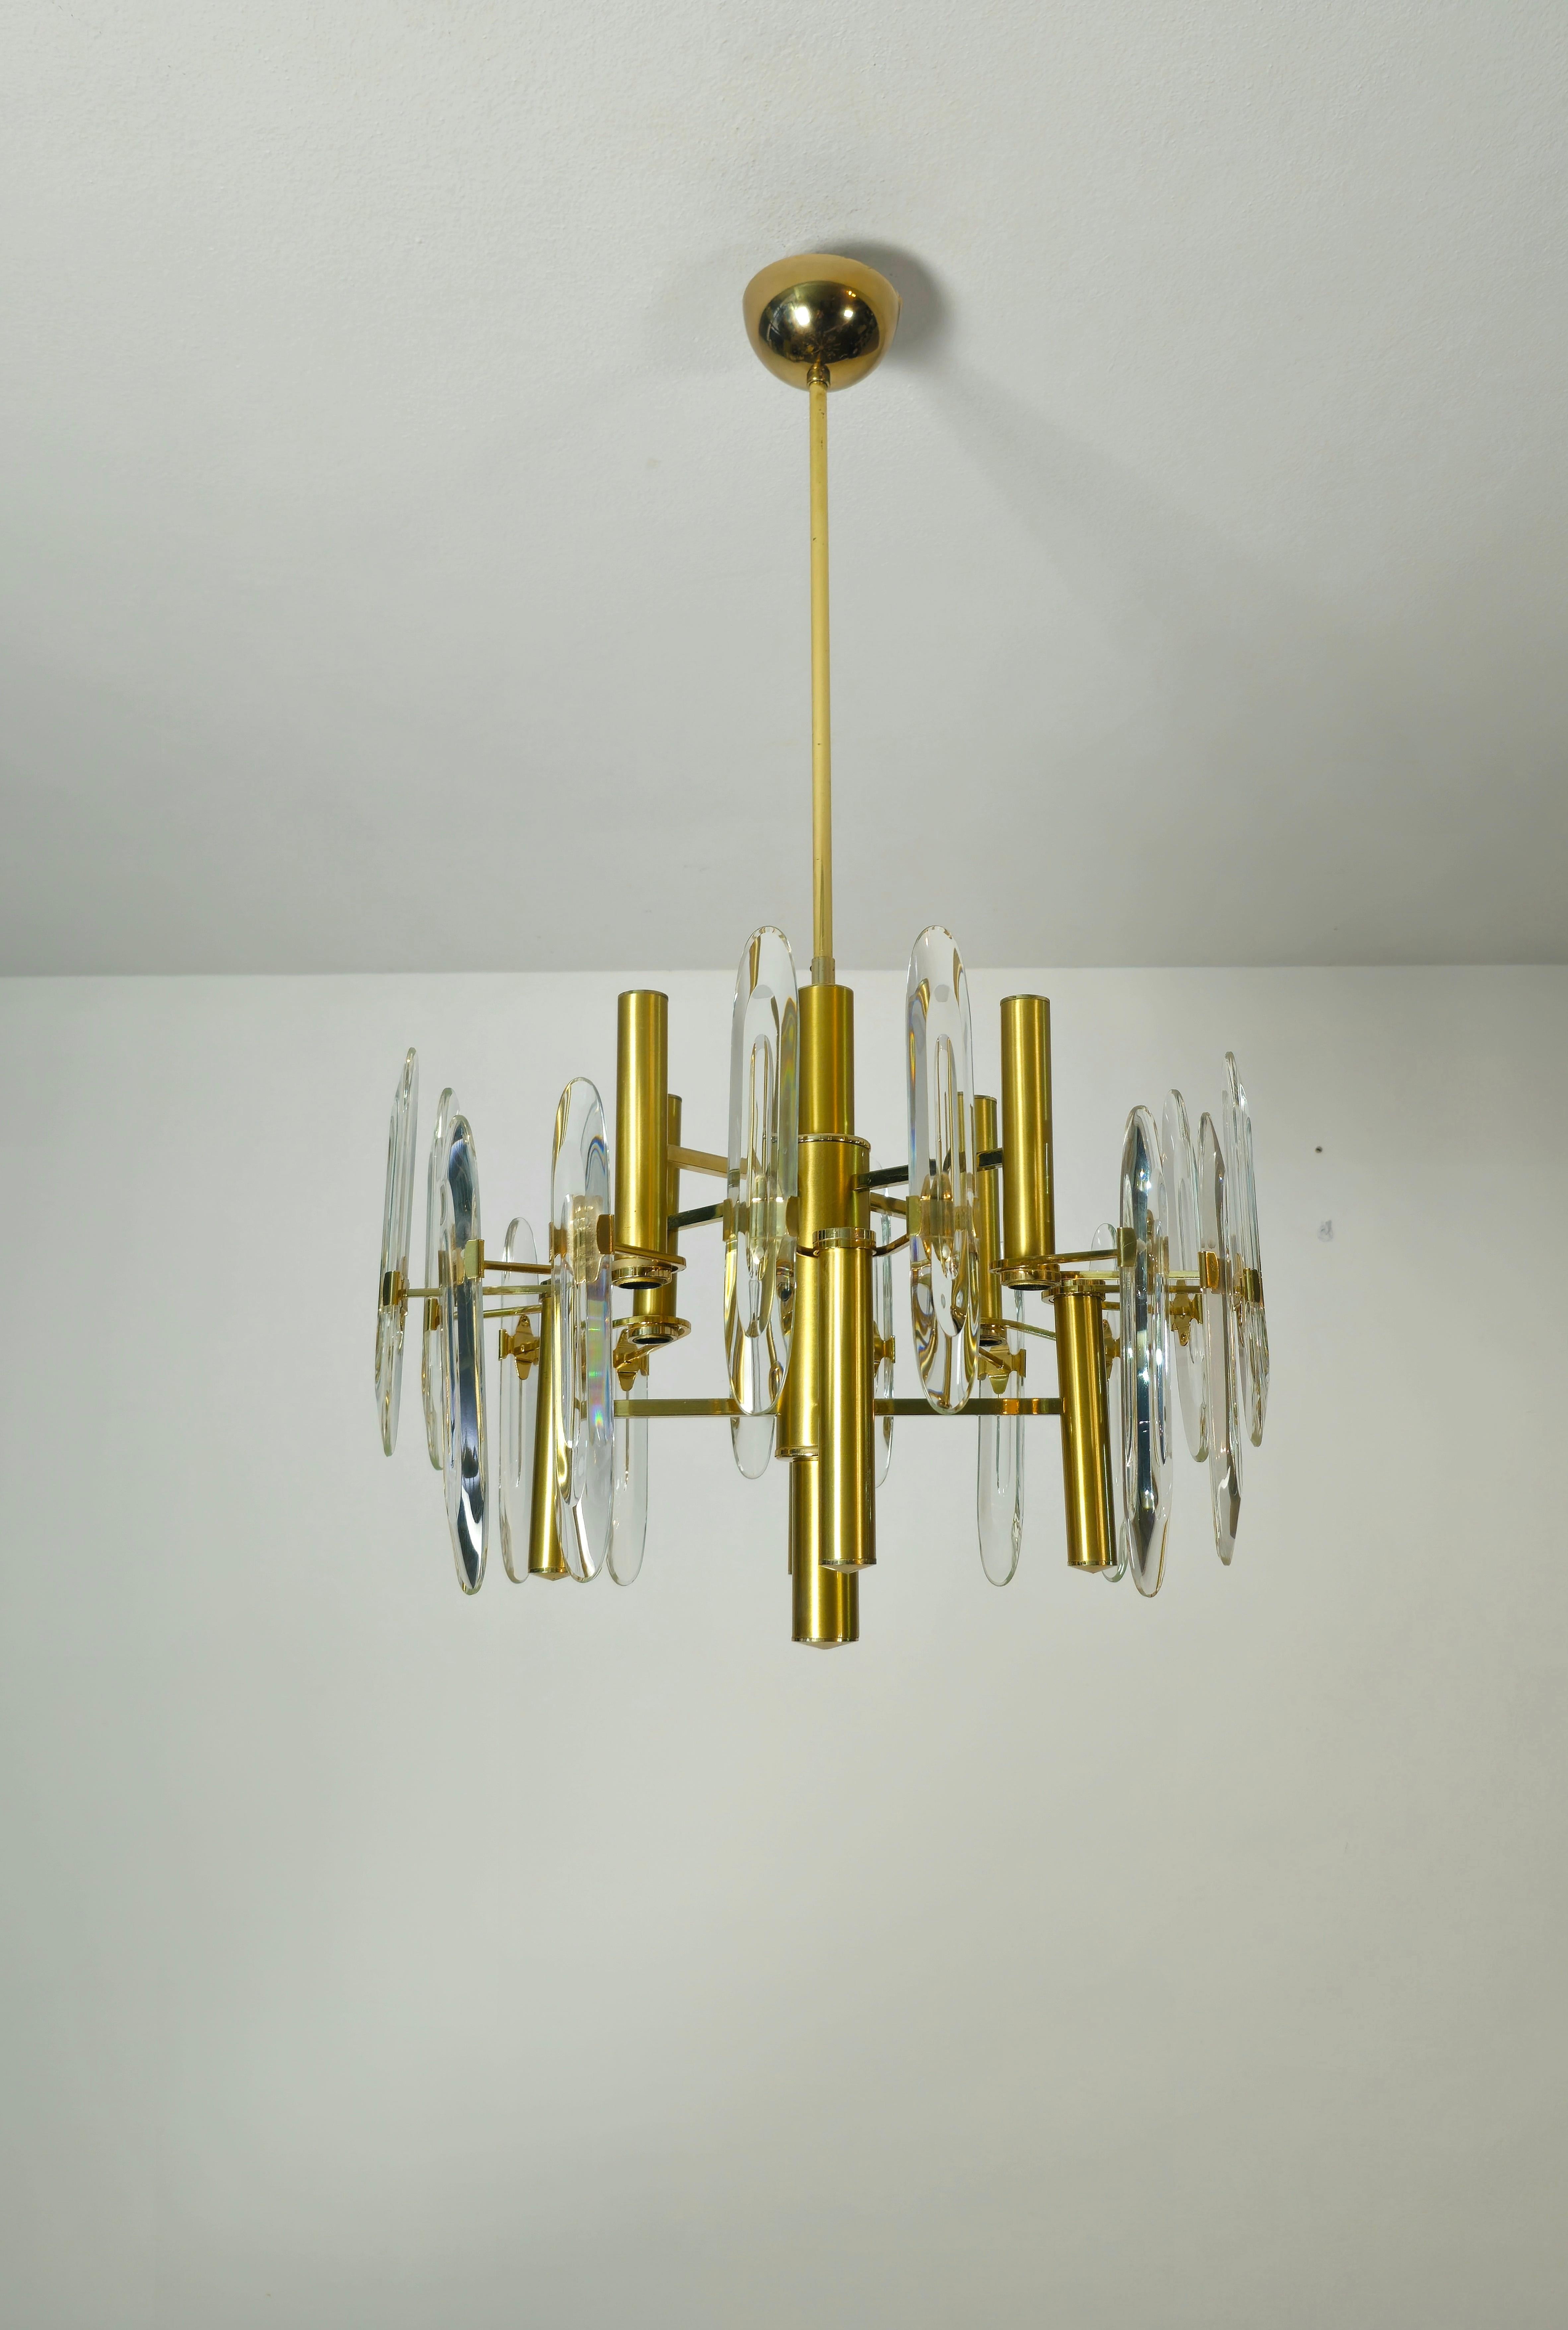 Chandelier designed by the Italian designer Gaetano Sciolar and produced in Italy in the 70s. The chandelier has 8 E14 lights and a brass structure that supports 16 oval-shaped cut crystal glasses.



Note: We try to offer our customers an excellent